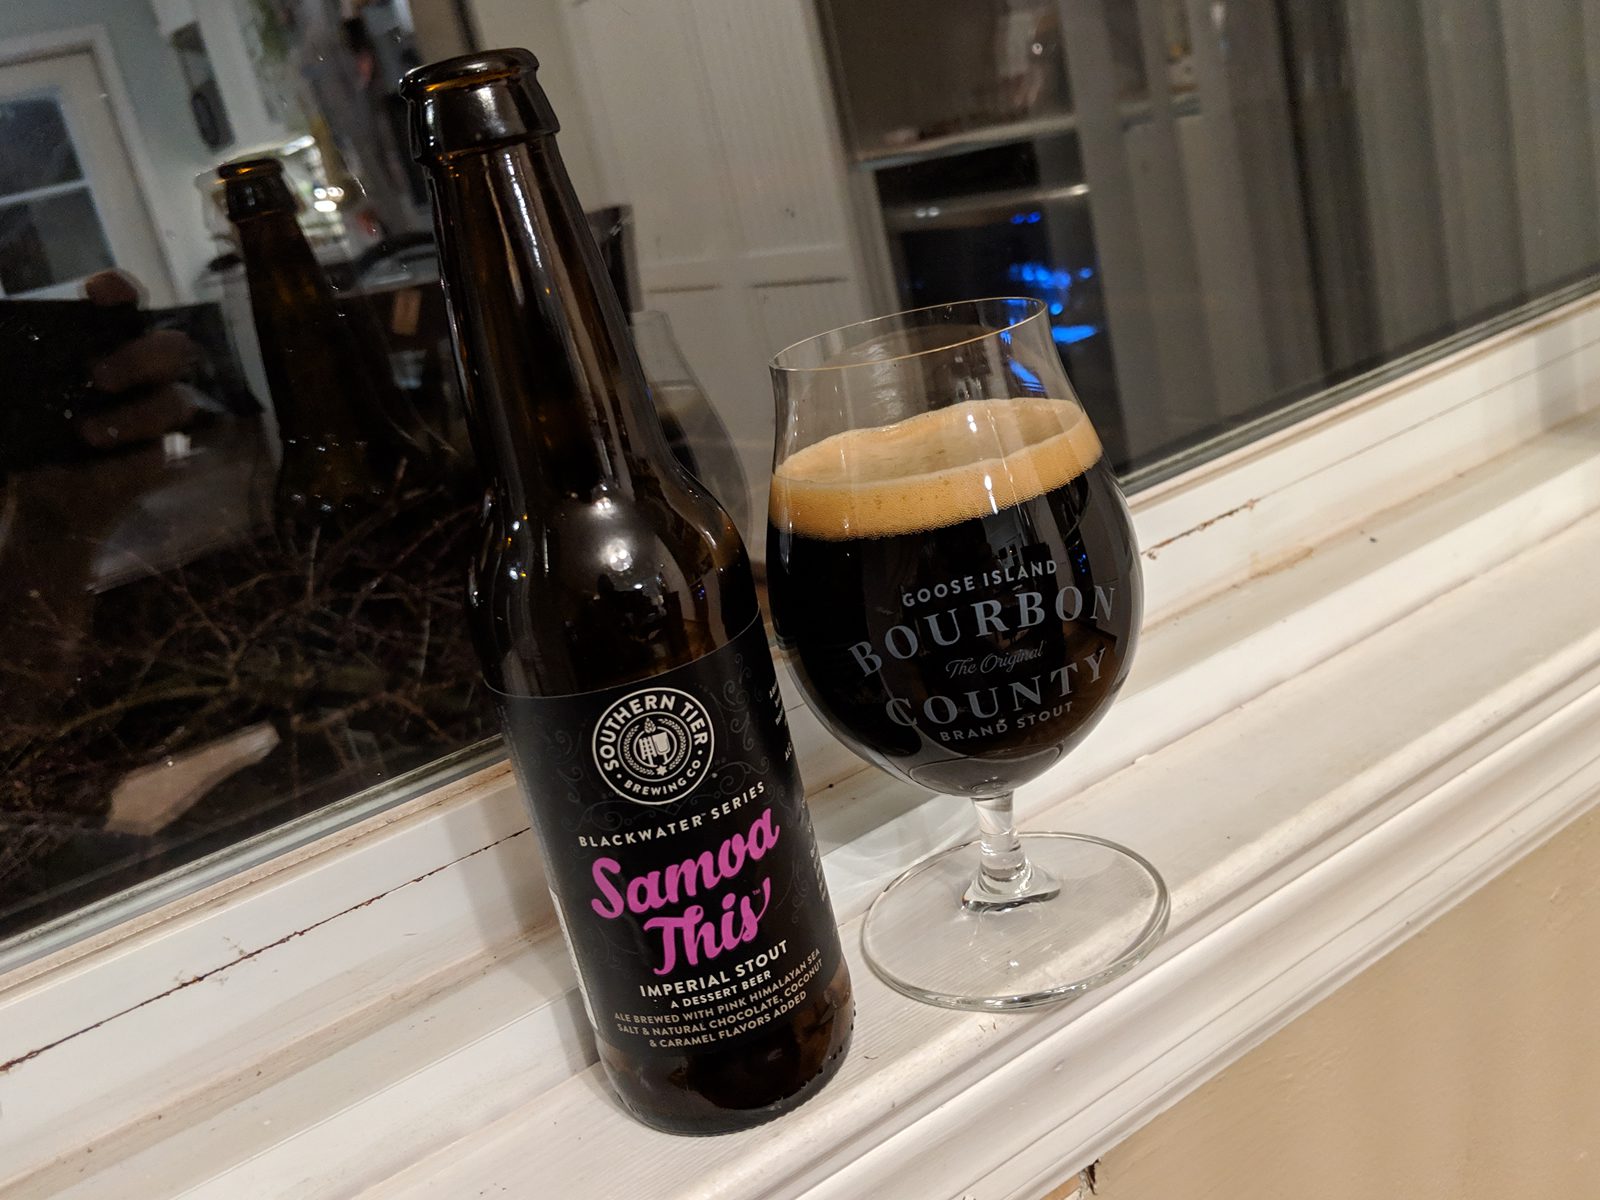 Southern Tier Brewing Company: Samoa This